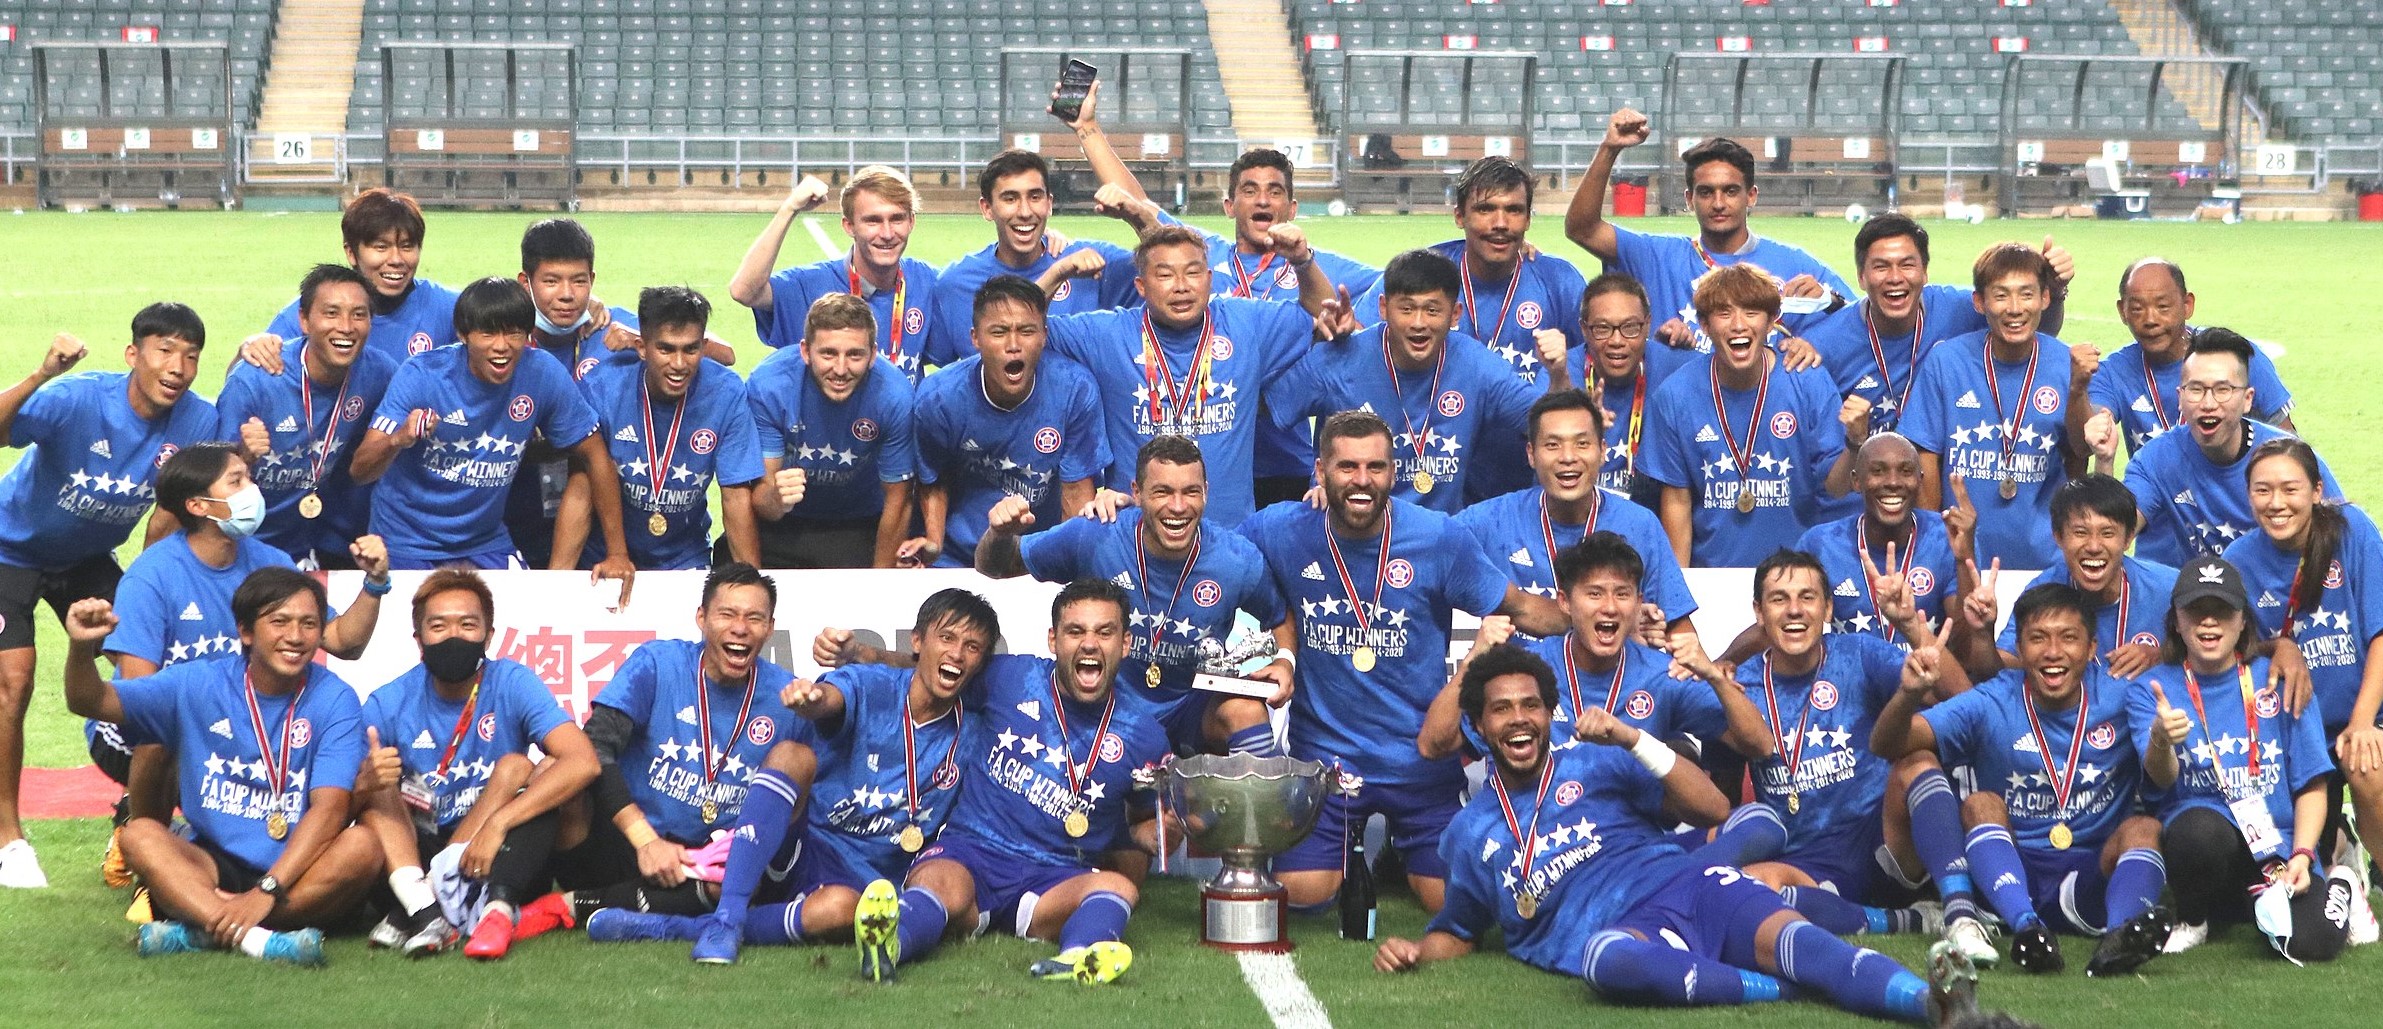 Eastern Long Lions, winner of the 2019-2020 FA Cup